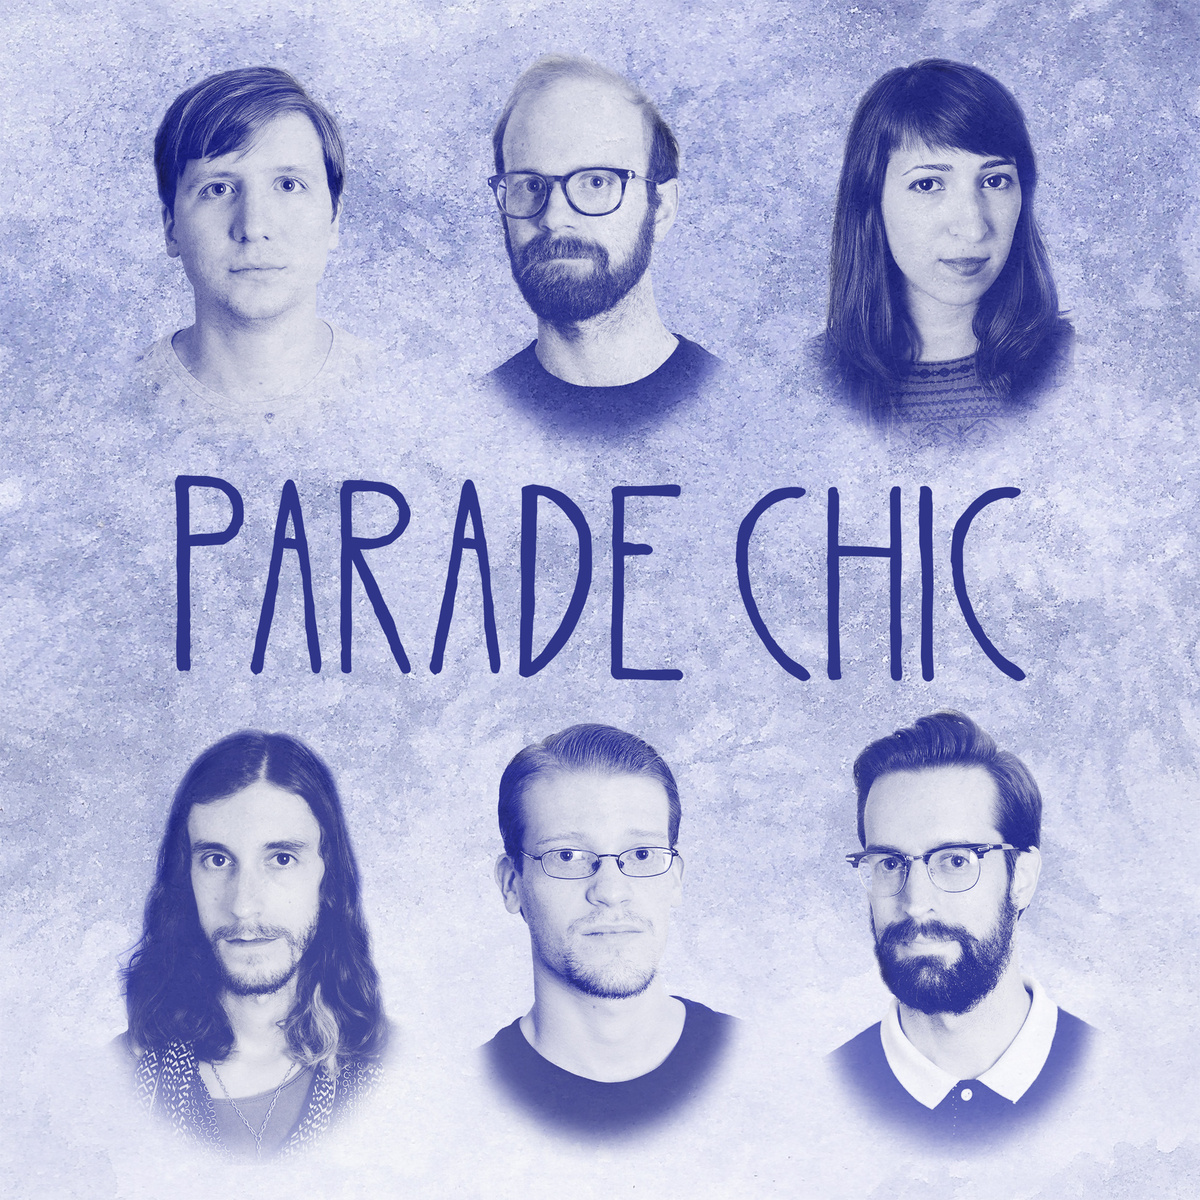 Parade Chic Shares First Single from One and Only Secret Dream